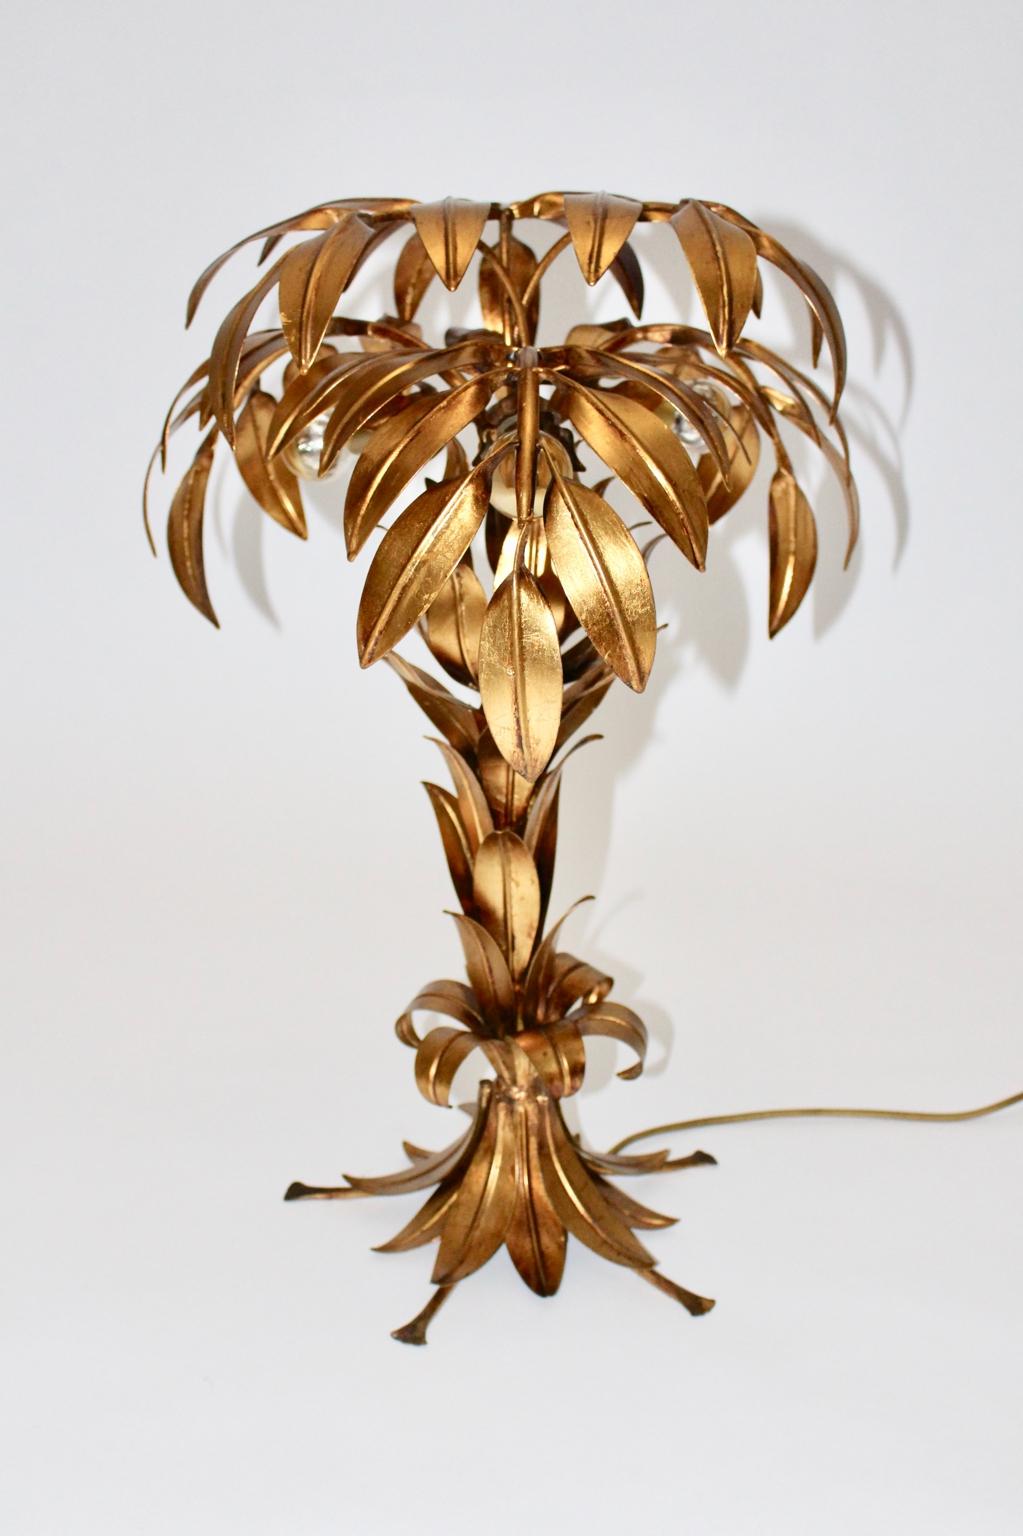 Hollywood Regency Style golden metal table lamp palm tree like designed by Hans Kögl 1970s Germany.
Three E 14 sockets and on/off switch
Very good original condition with minor signs of age and use

approx. measures:
Diameter. 45 cm
Height: 65 cm.